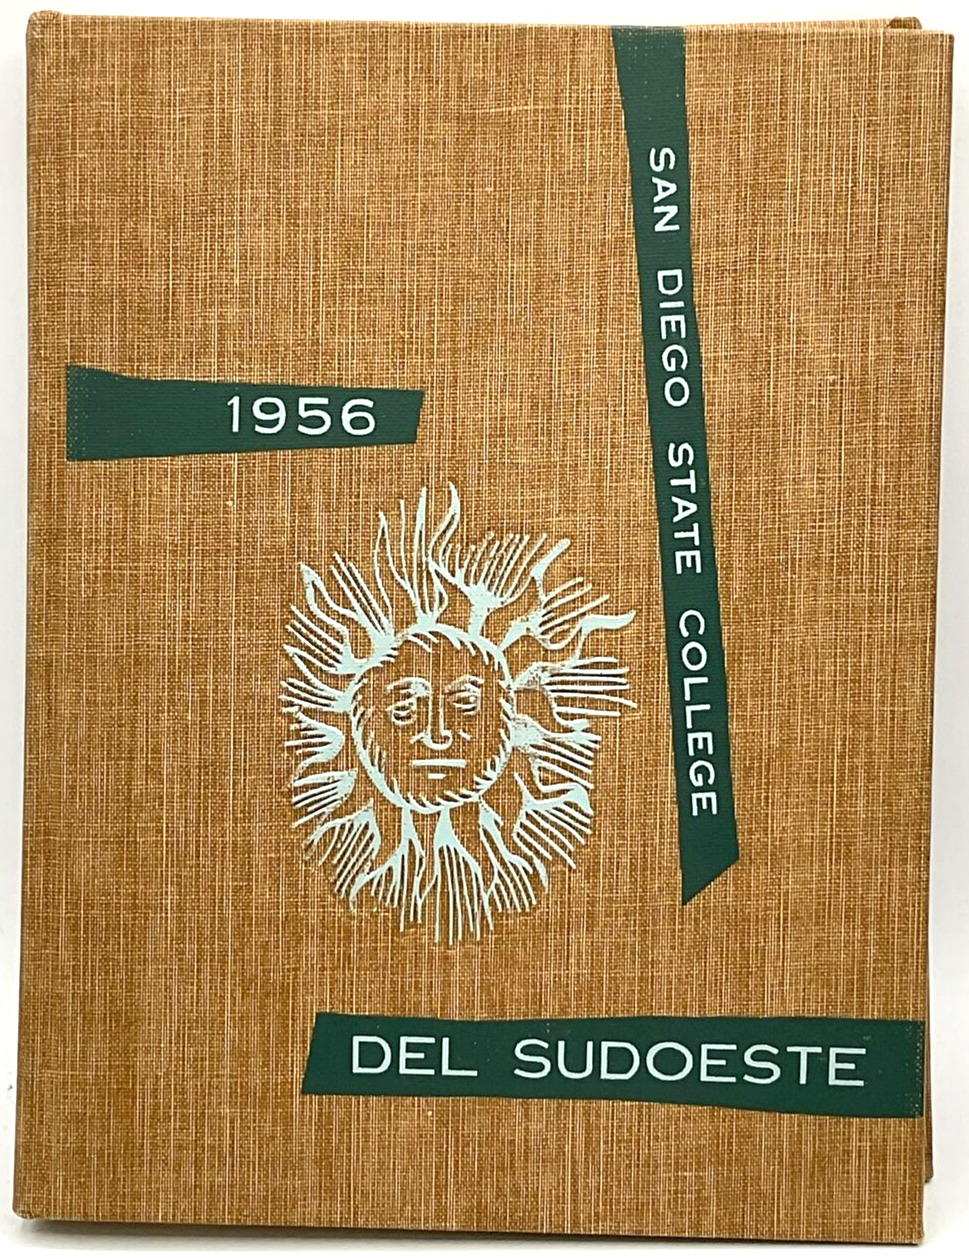 1956 San Diego State University Del Sudoeste Annual Yearbook American Culture